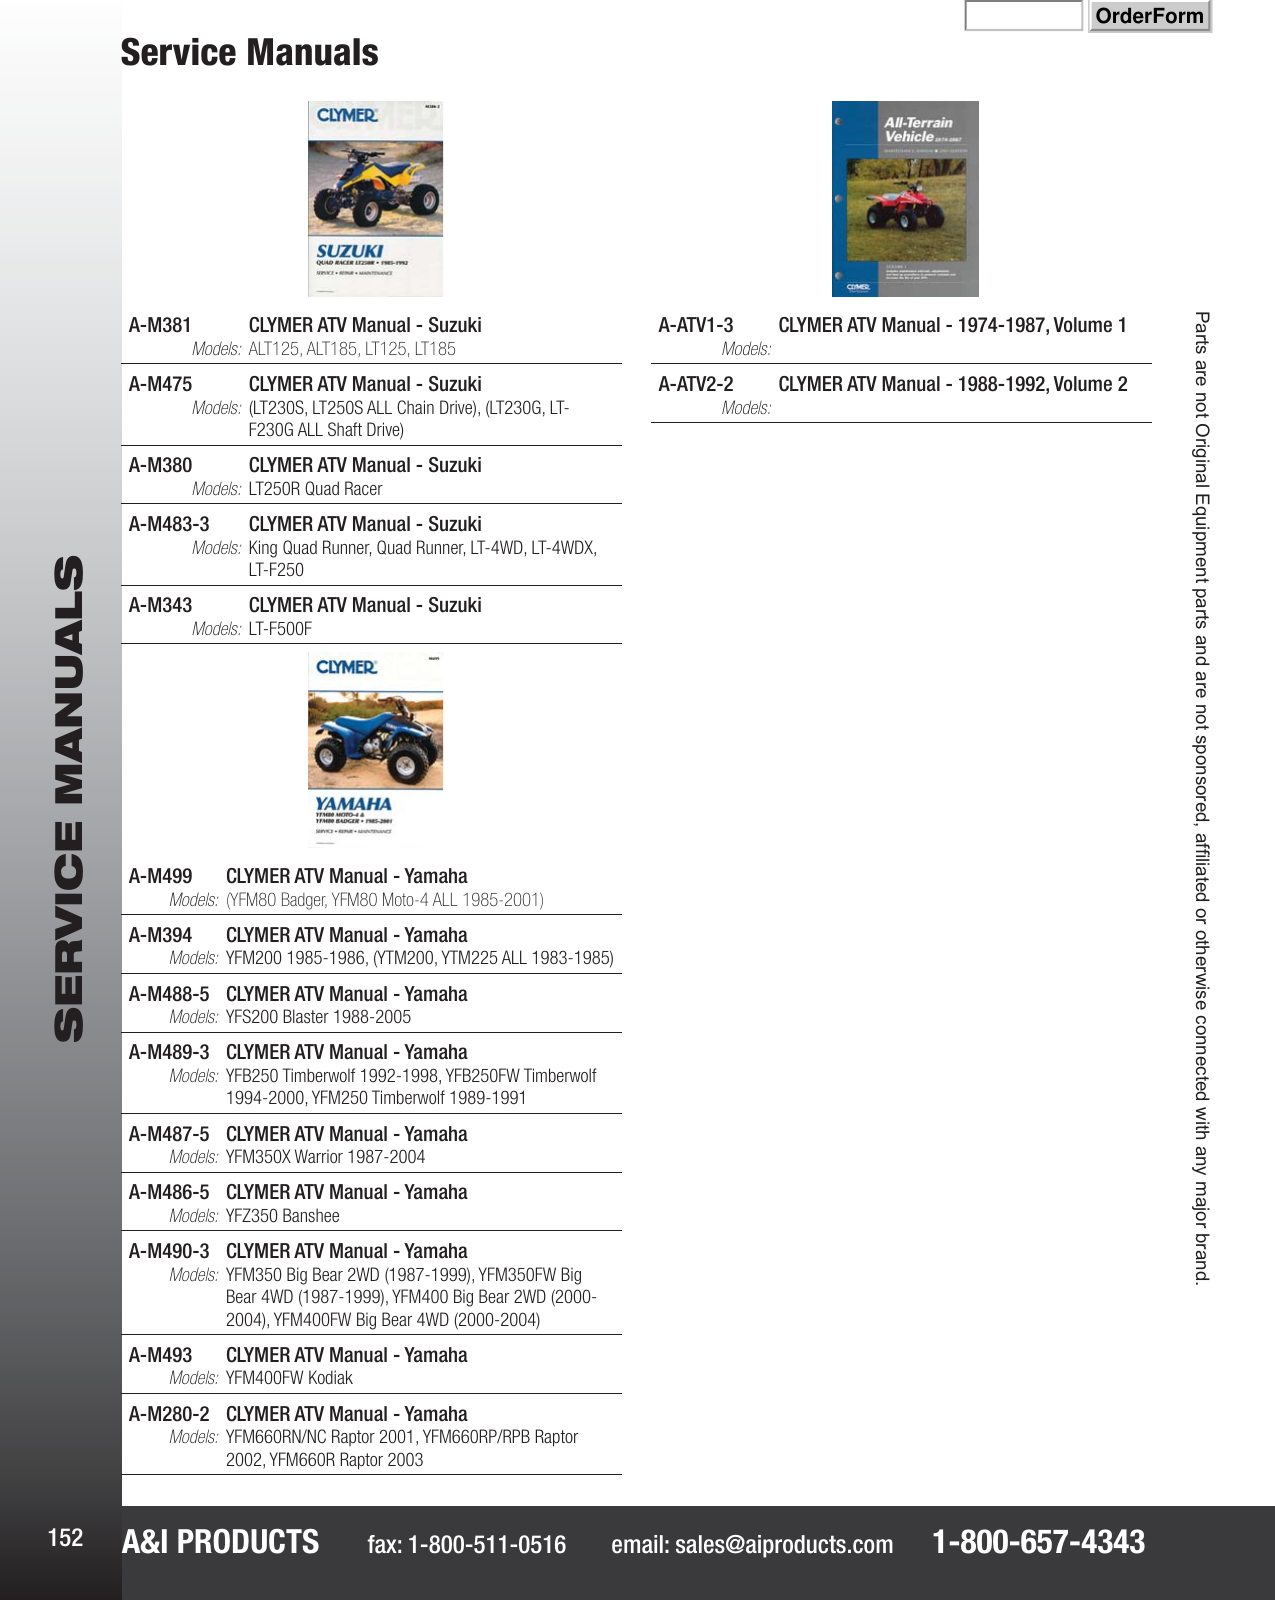 Page 8 of 8 - Catalog  !! Manuals